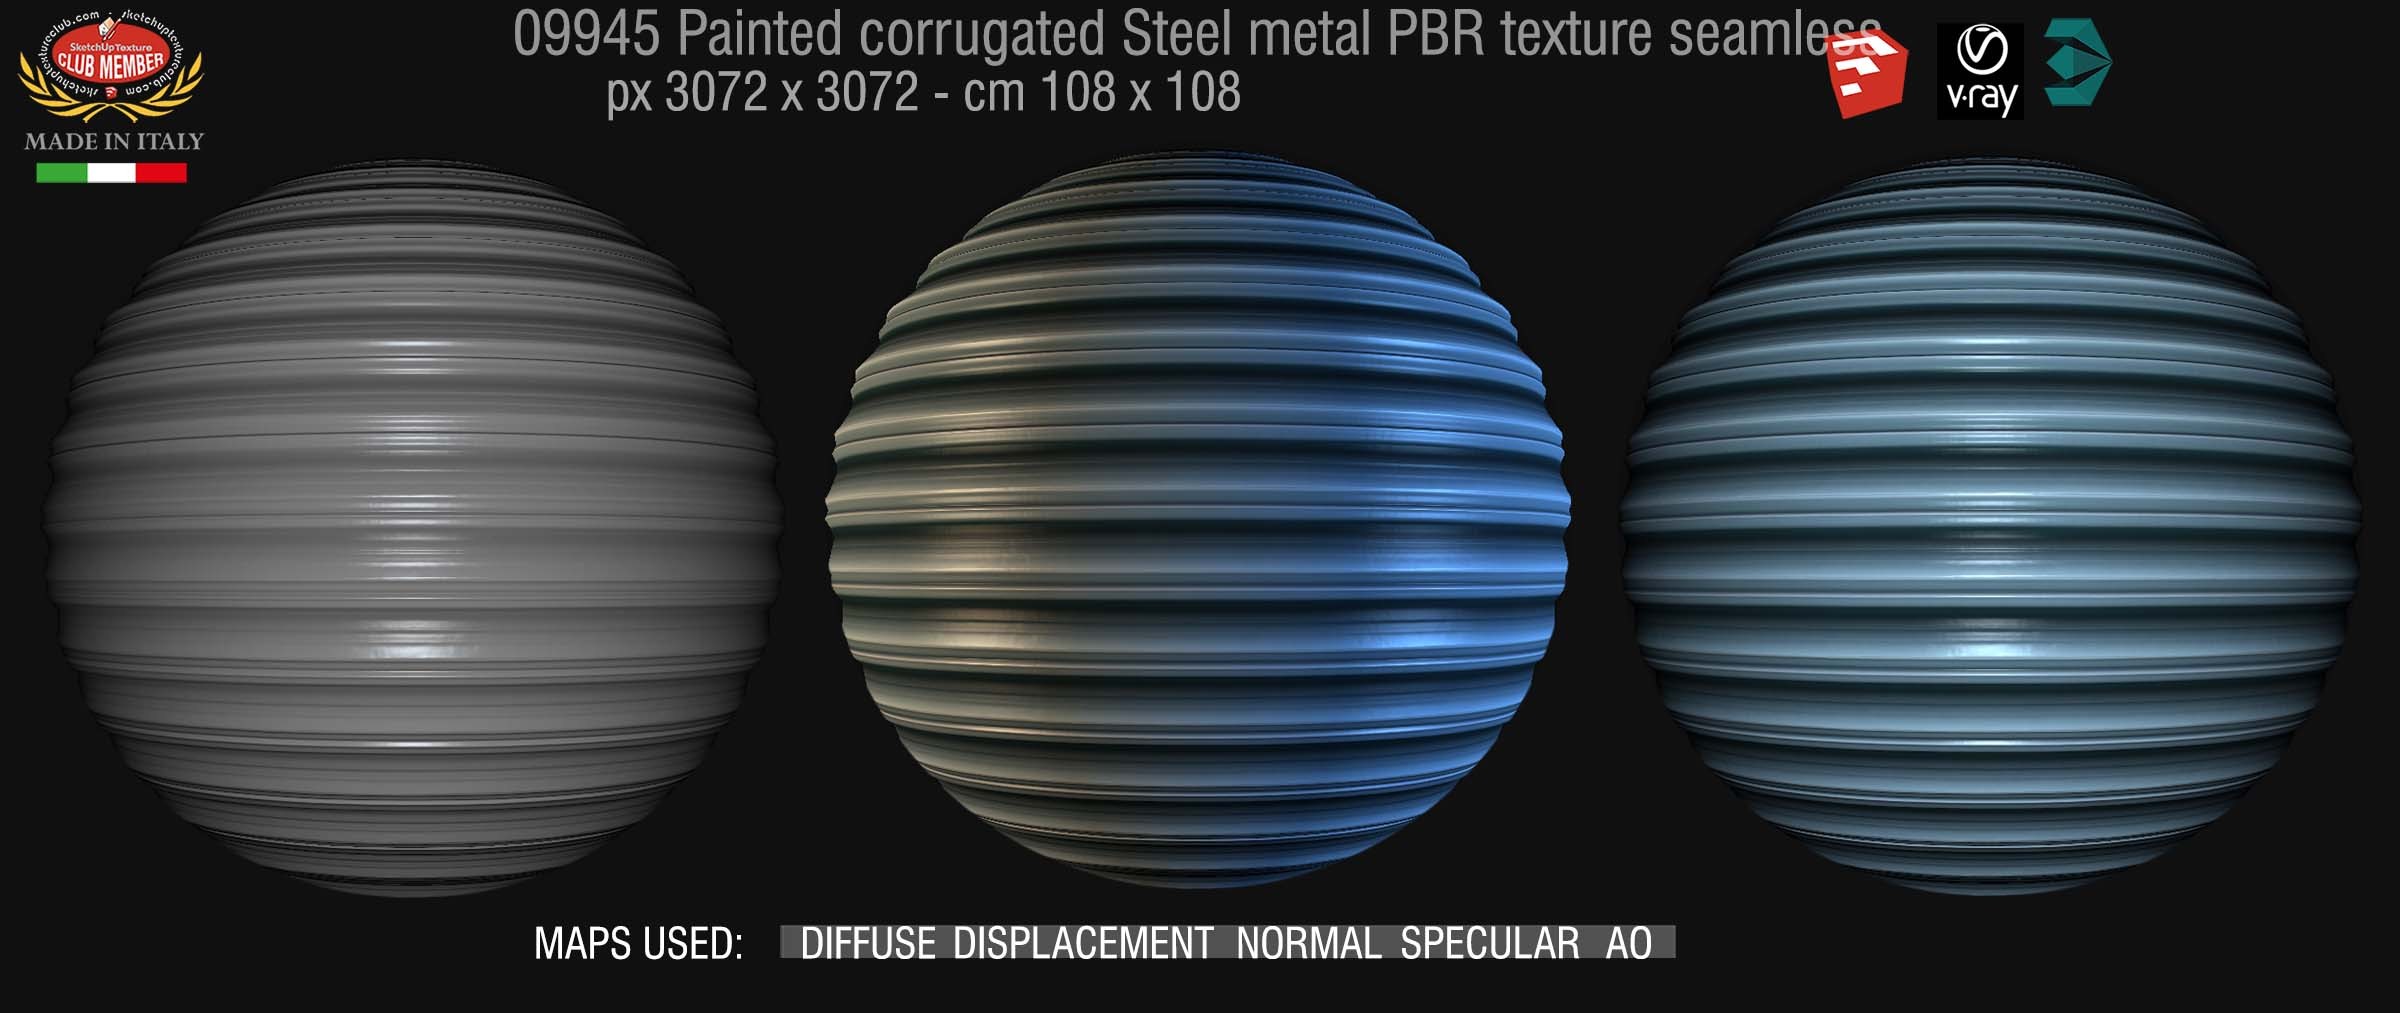 09945 28_painted corrugated metal PBR texture seamless DEMO